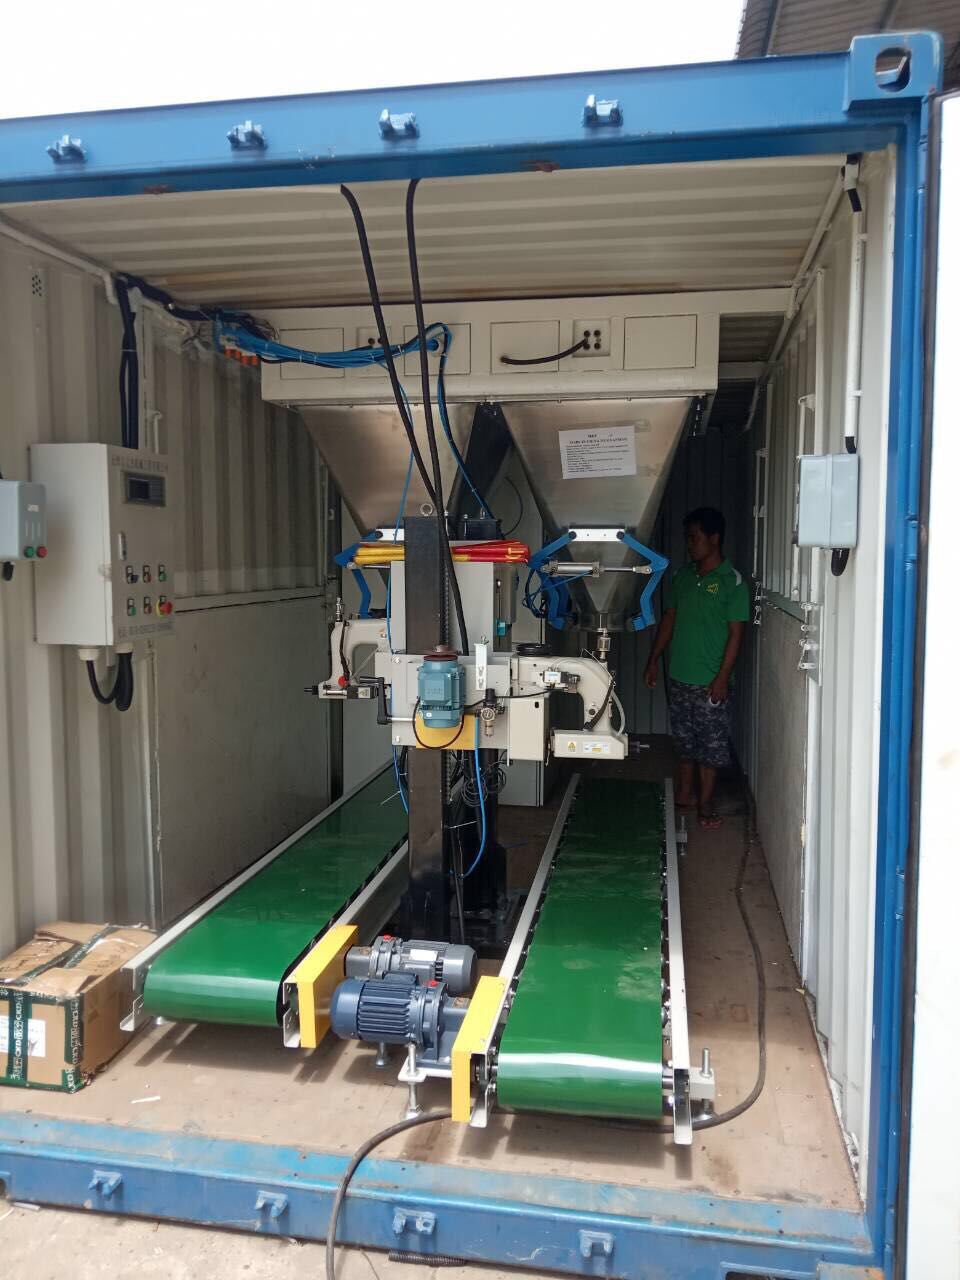 MOBILE CEMENT BAGGING MACHINES containerized bagging system Mobile Bagging Unit MOBILE BAGGING MACHINES for Grains, pulses, iodised salts, sugar Containerised bagging system